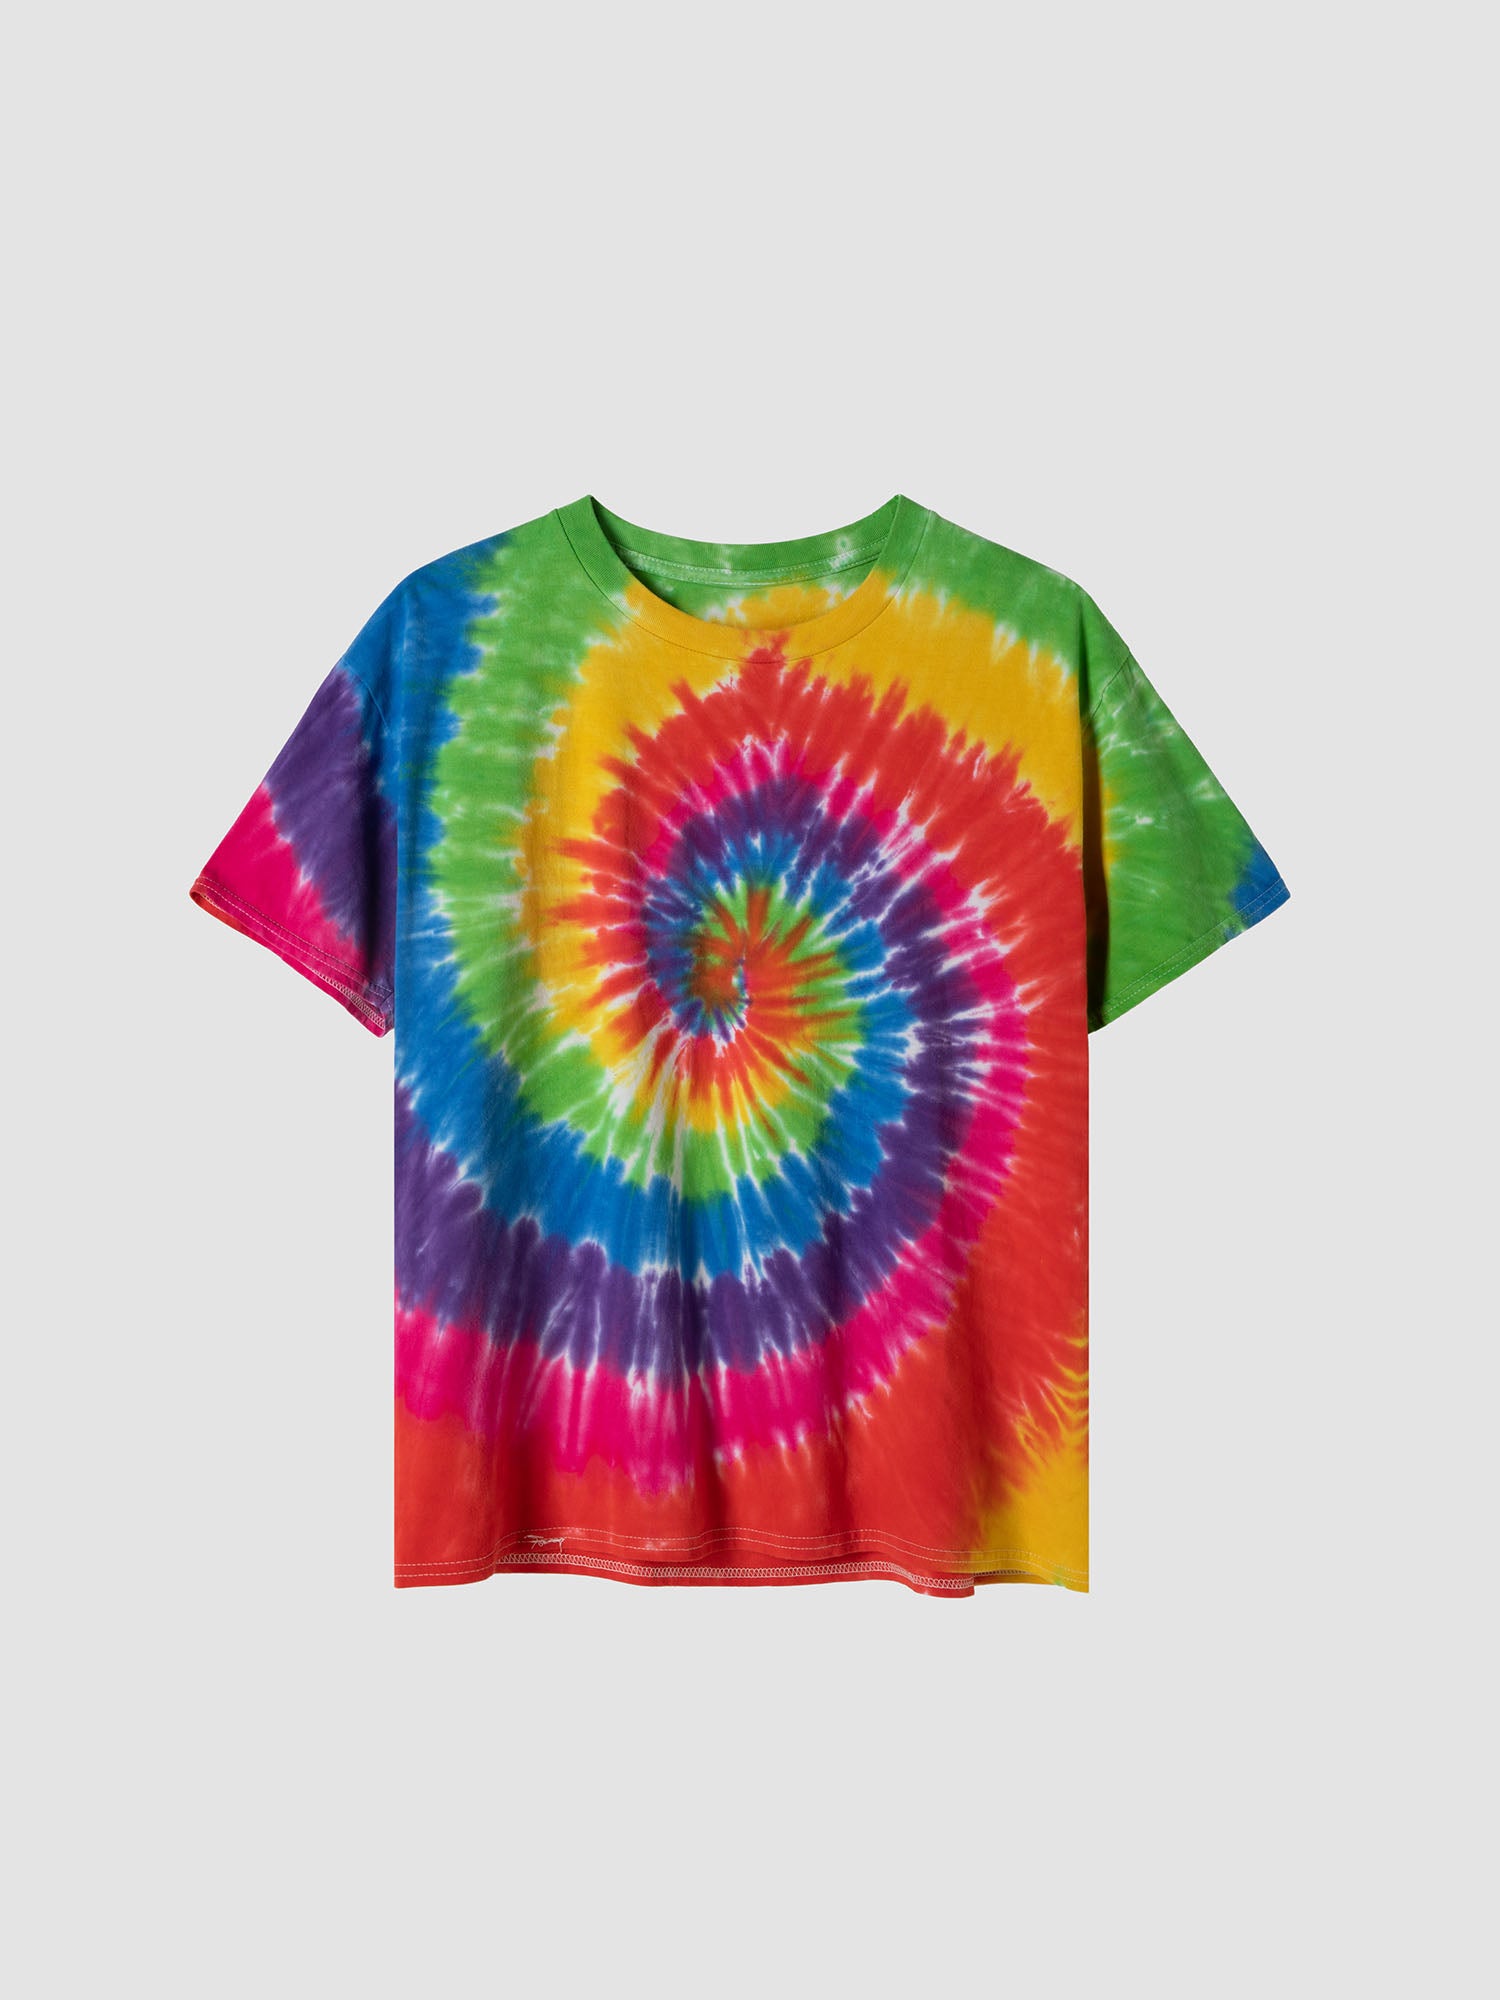 JUSTNOTAG Multi-Color Circle Center Whirlwind Tie-Dye Short Sleeve Tee